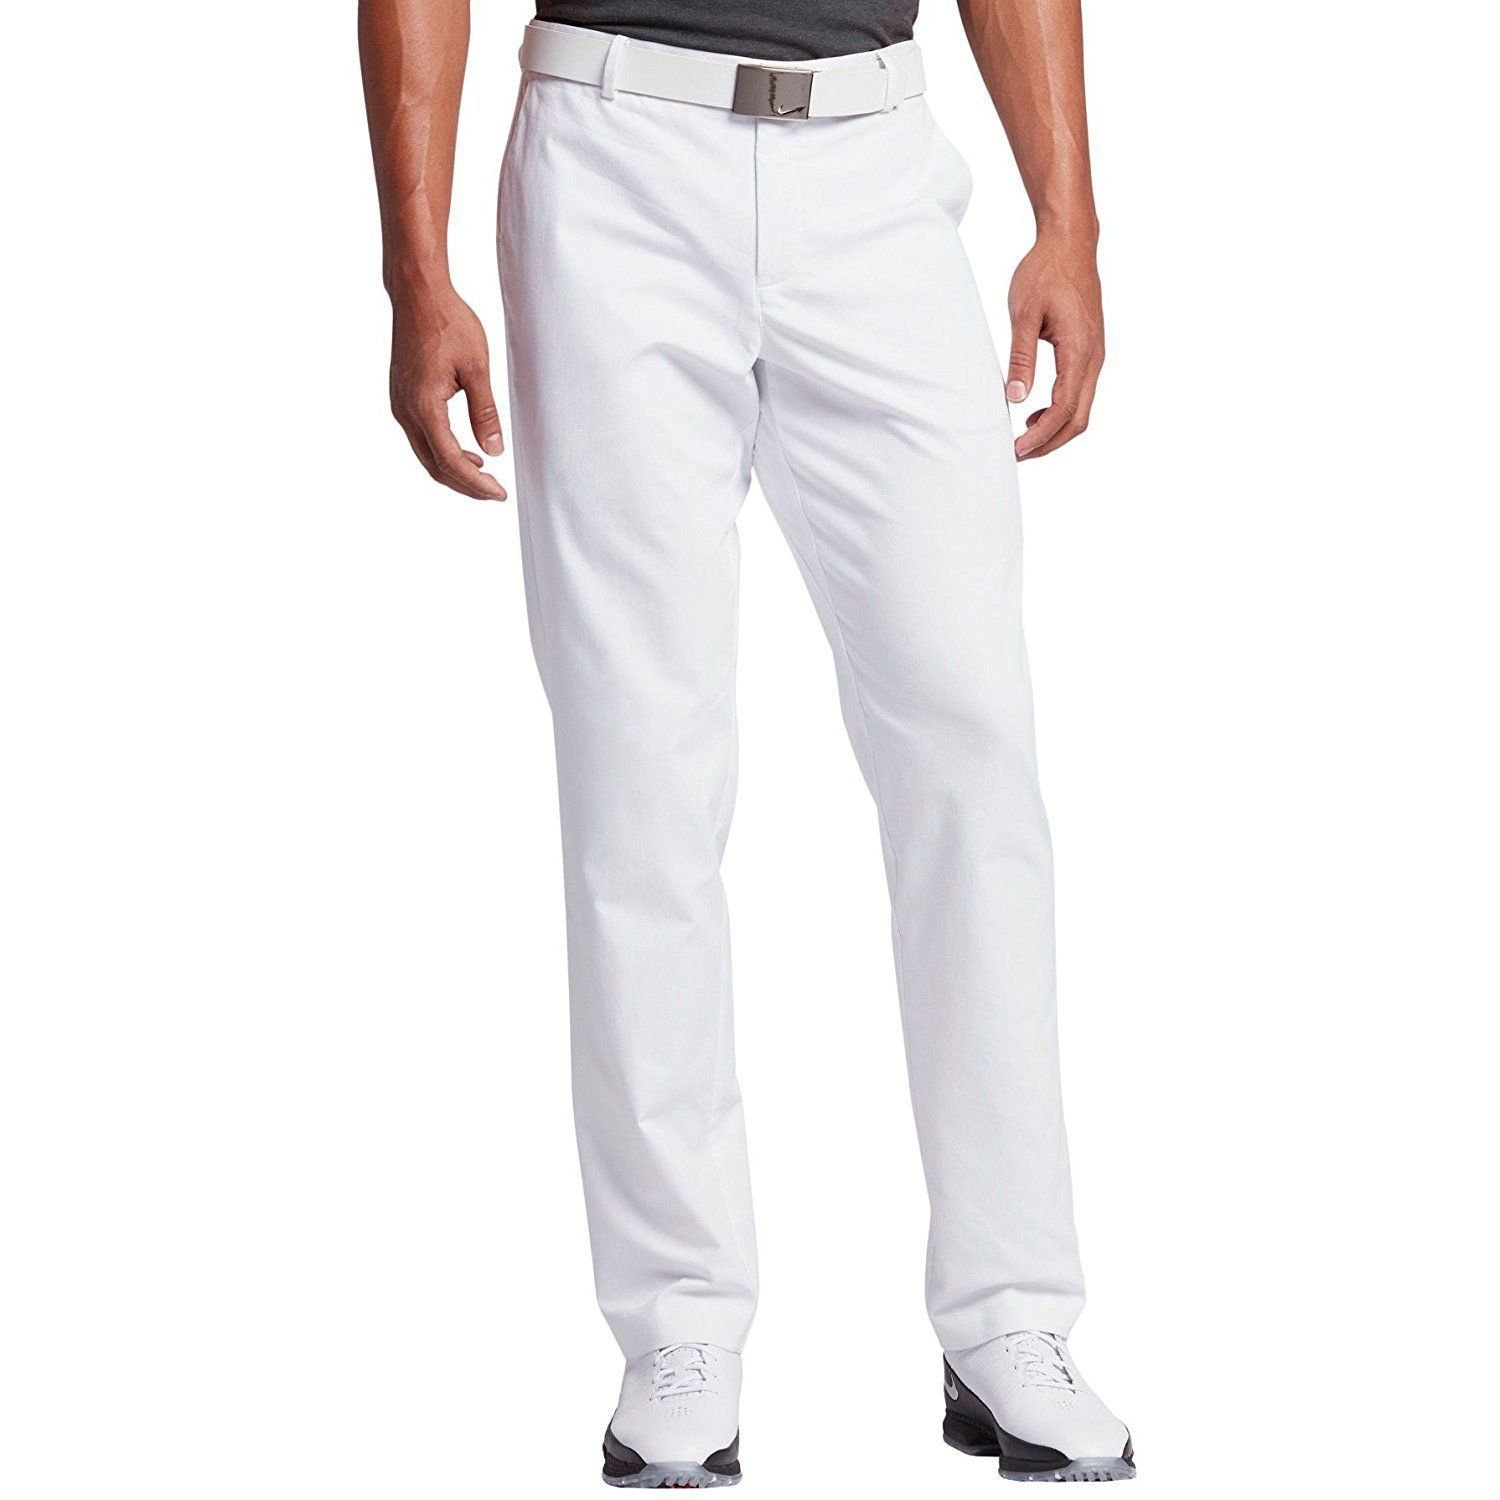 Nike 40 x 32 Men's Modern Fit WASHED STYLE Golf Pants NEW $90 833190 ...